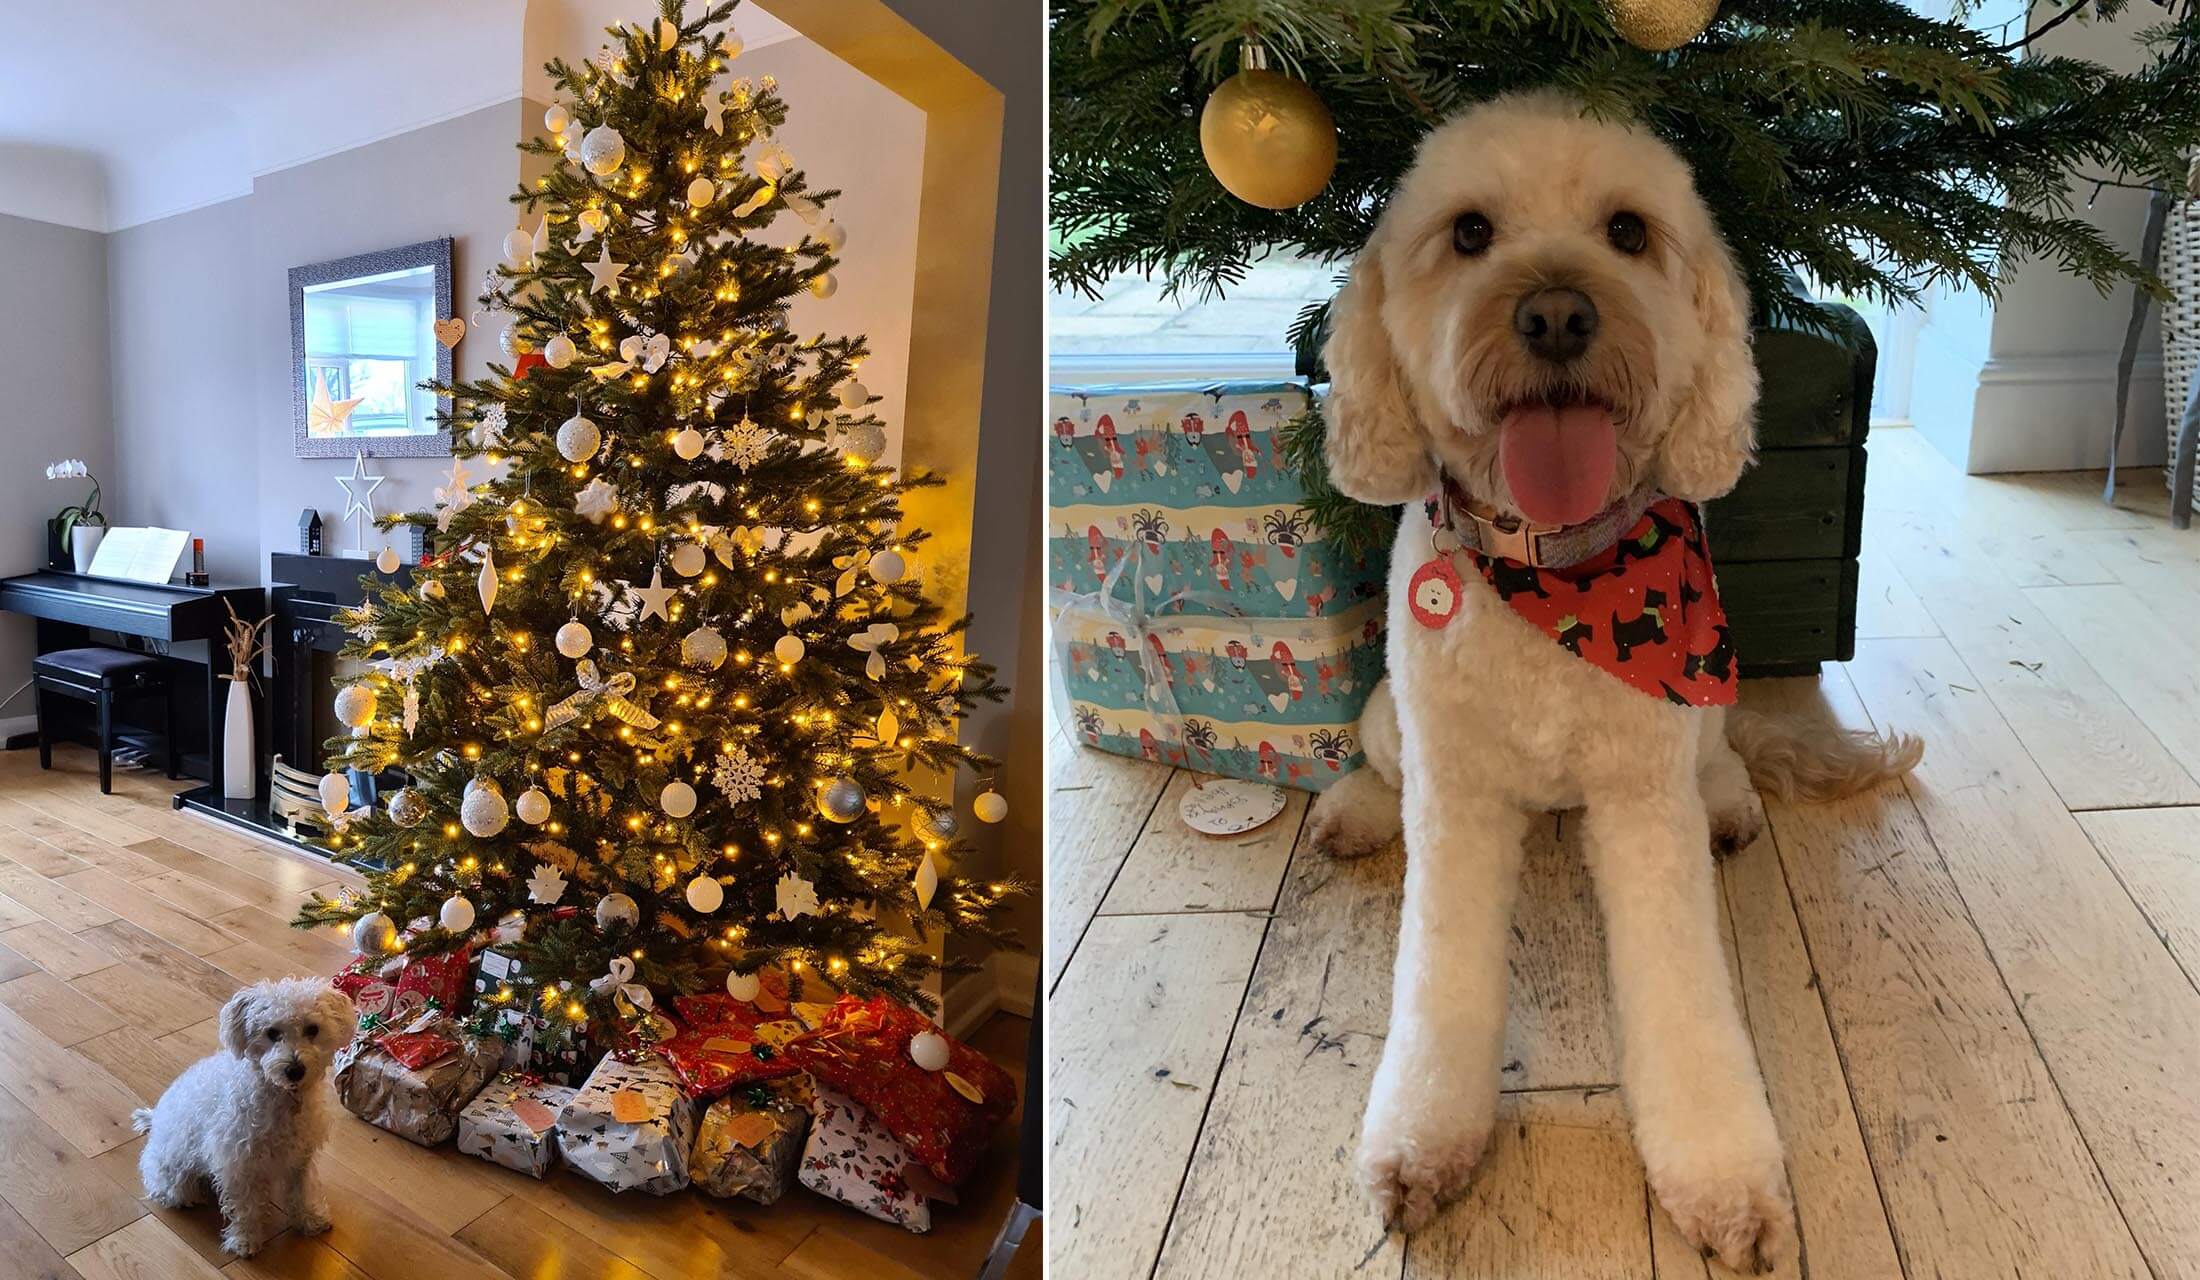 Dog gift guide. Christmas dogs under or by a Christmas tree